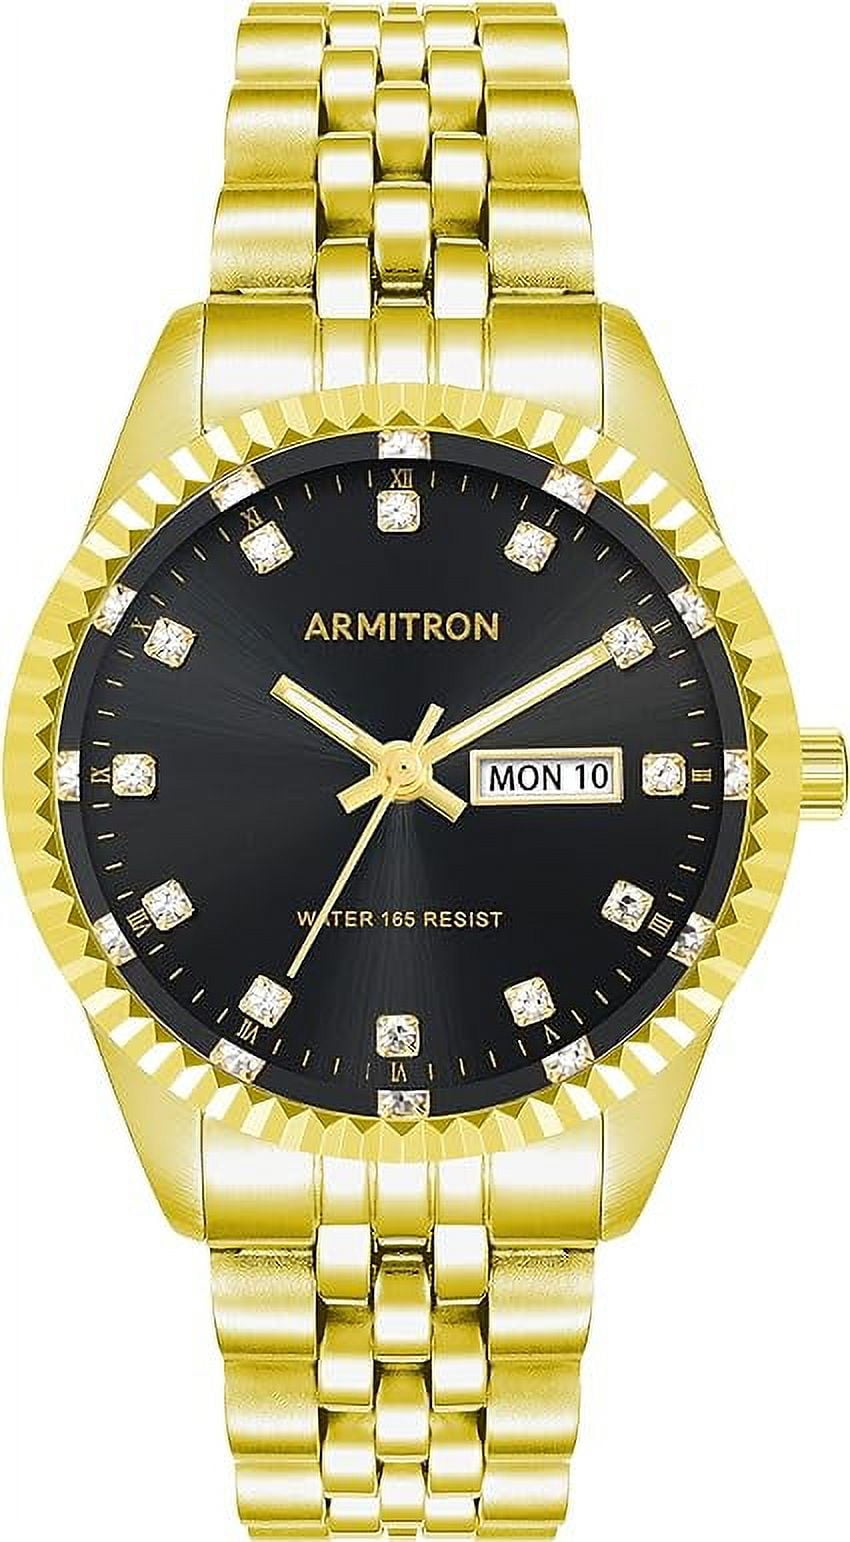 Armitron Overview: Are These Cheap Watches Good? • The Slender Wrist